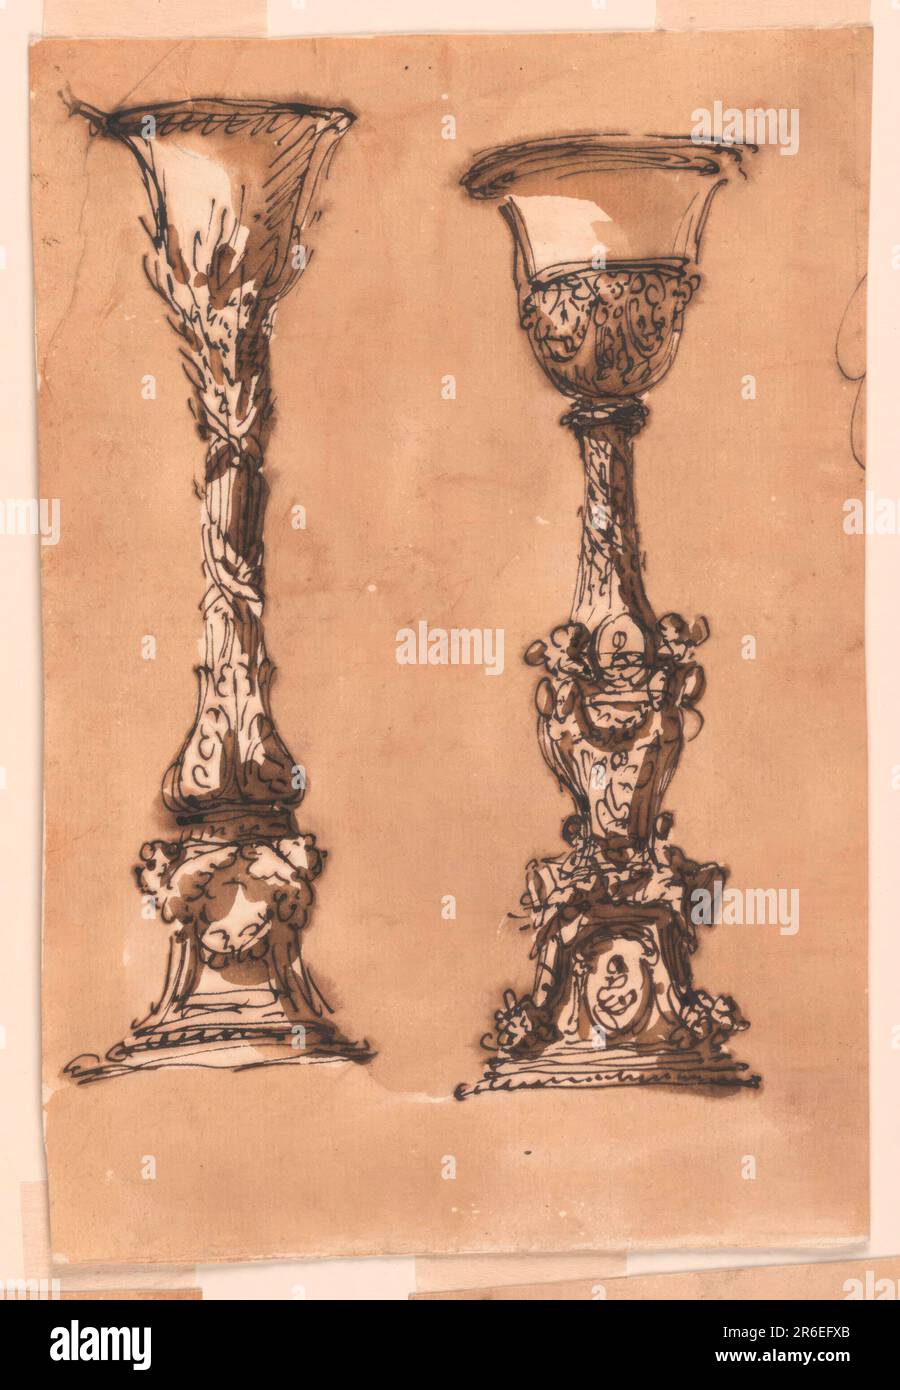 At left, a variation of 1901-39-1165. 1) The pedestal is decorated with festoons supported by cherubim at the corners. The stem is slimmer, the bowl without the upper motif. At right: the pedestal is angular, with inverse cornucopiae at the edges. In the front is an oval medallion. Above upon the corners sit figures. The stem has the shape of a baluster with a band above the spot with the biggest diameter. Upon it sit two angels supporting an oval medallion. The are connected by a festoon. The lower part of the bowl is decorated with festoons, supported by cherubim. Usual background. Pen and b Stock Photo